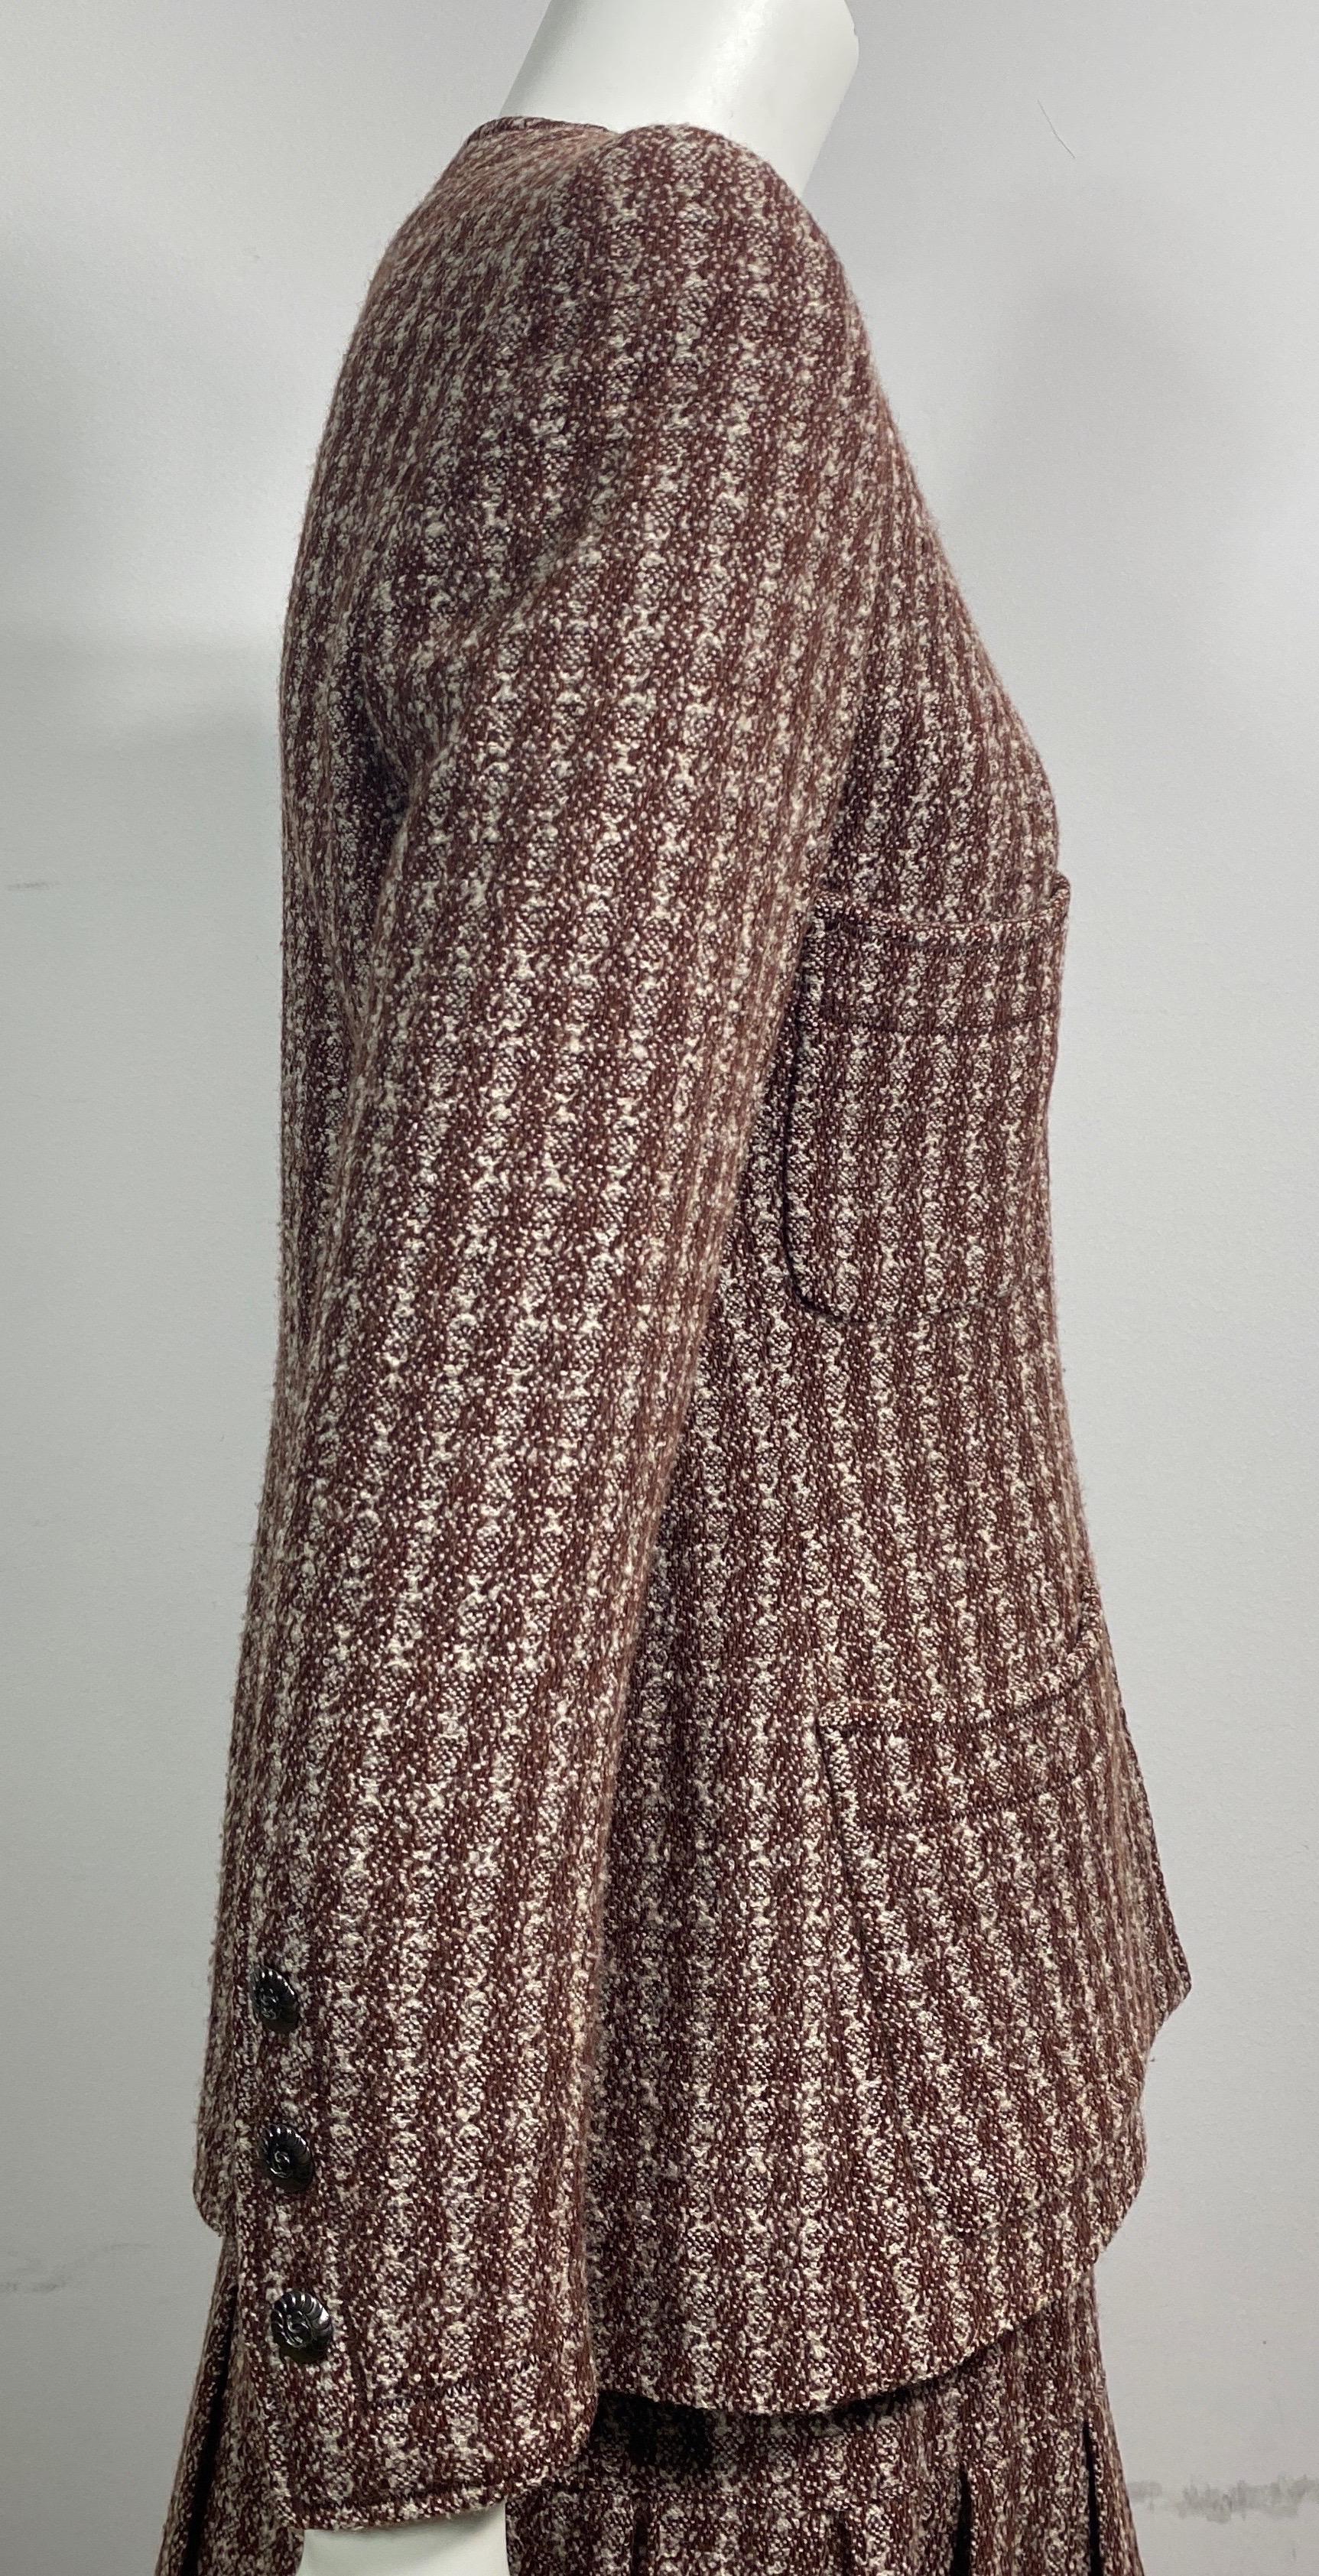 Chanel 1990’s Brown and Crème Wool Nailshead Tweed Skirt Suit-size 36 For Sale 6